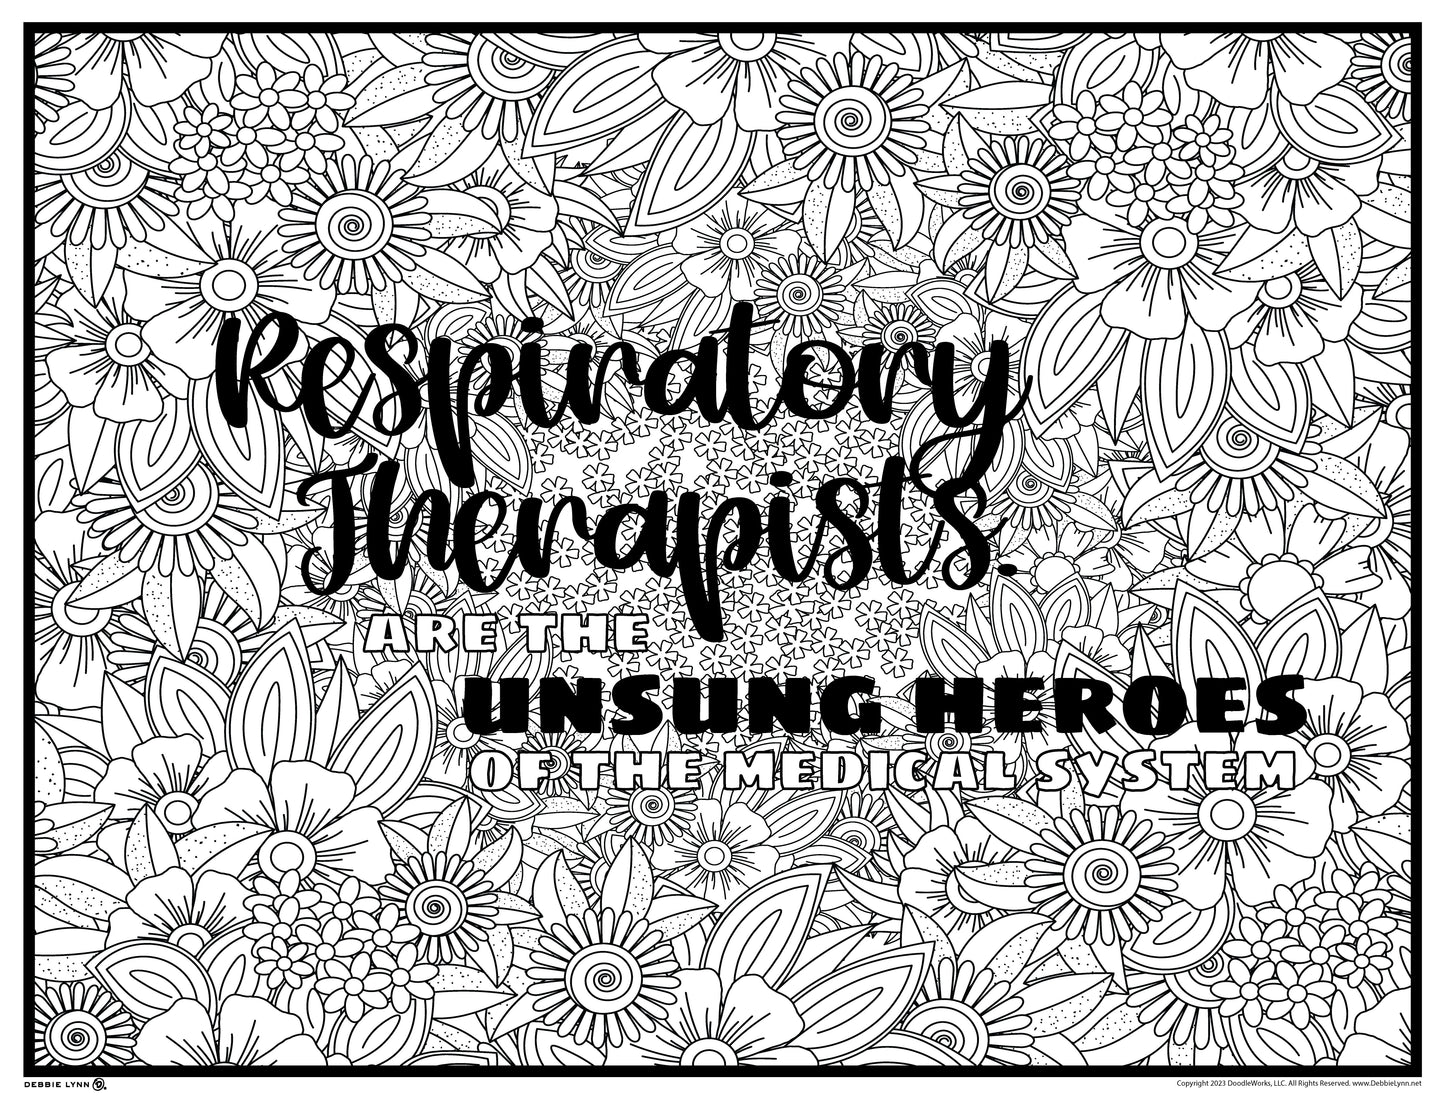 Respiratory Therapist Unsung Hero Giant Coloring Poster